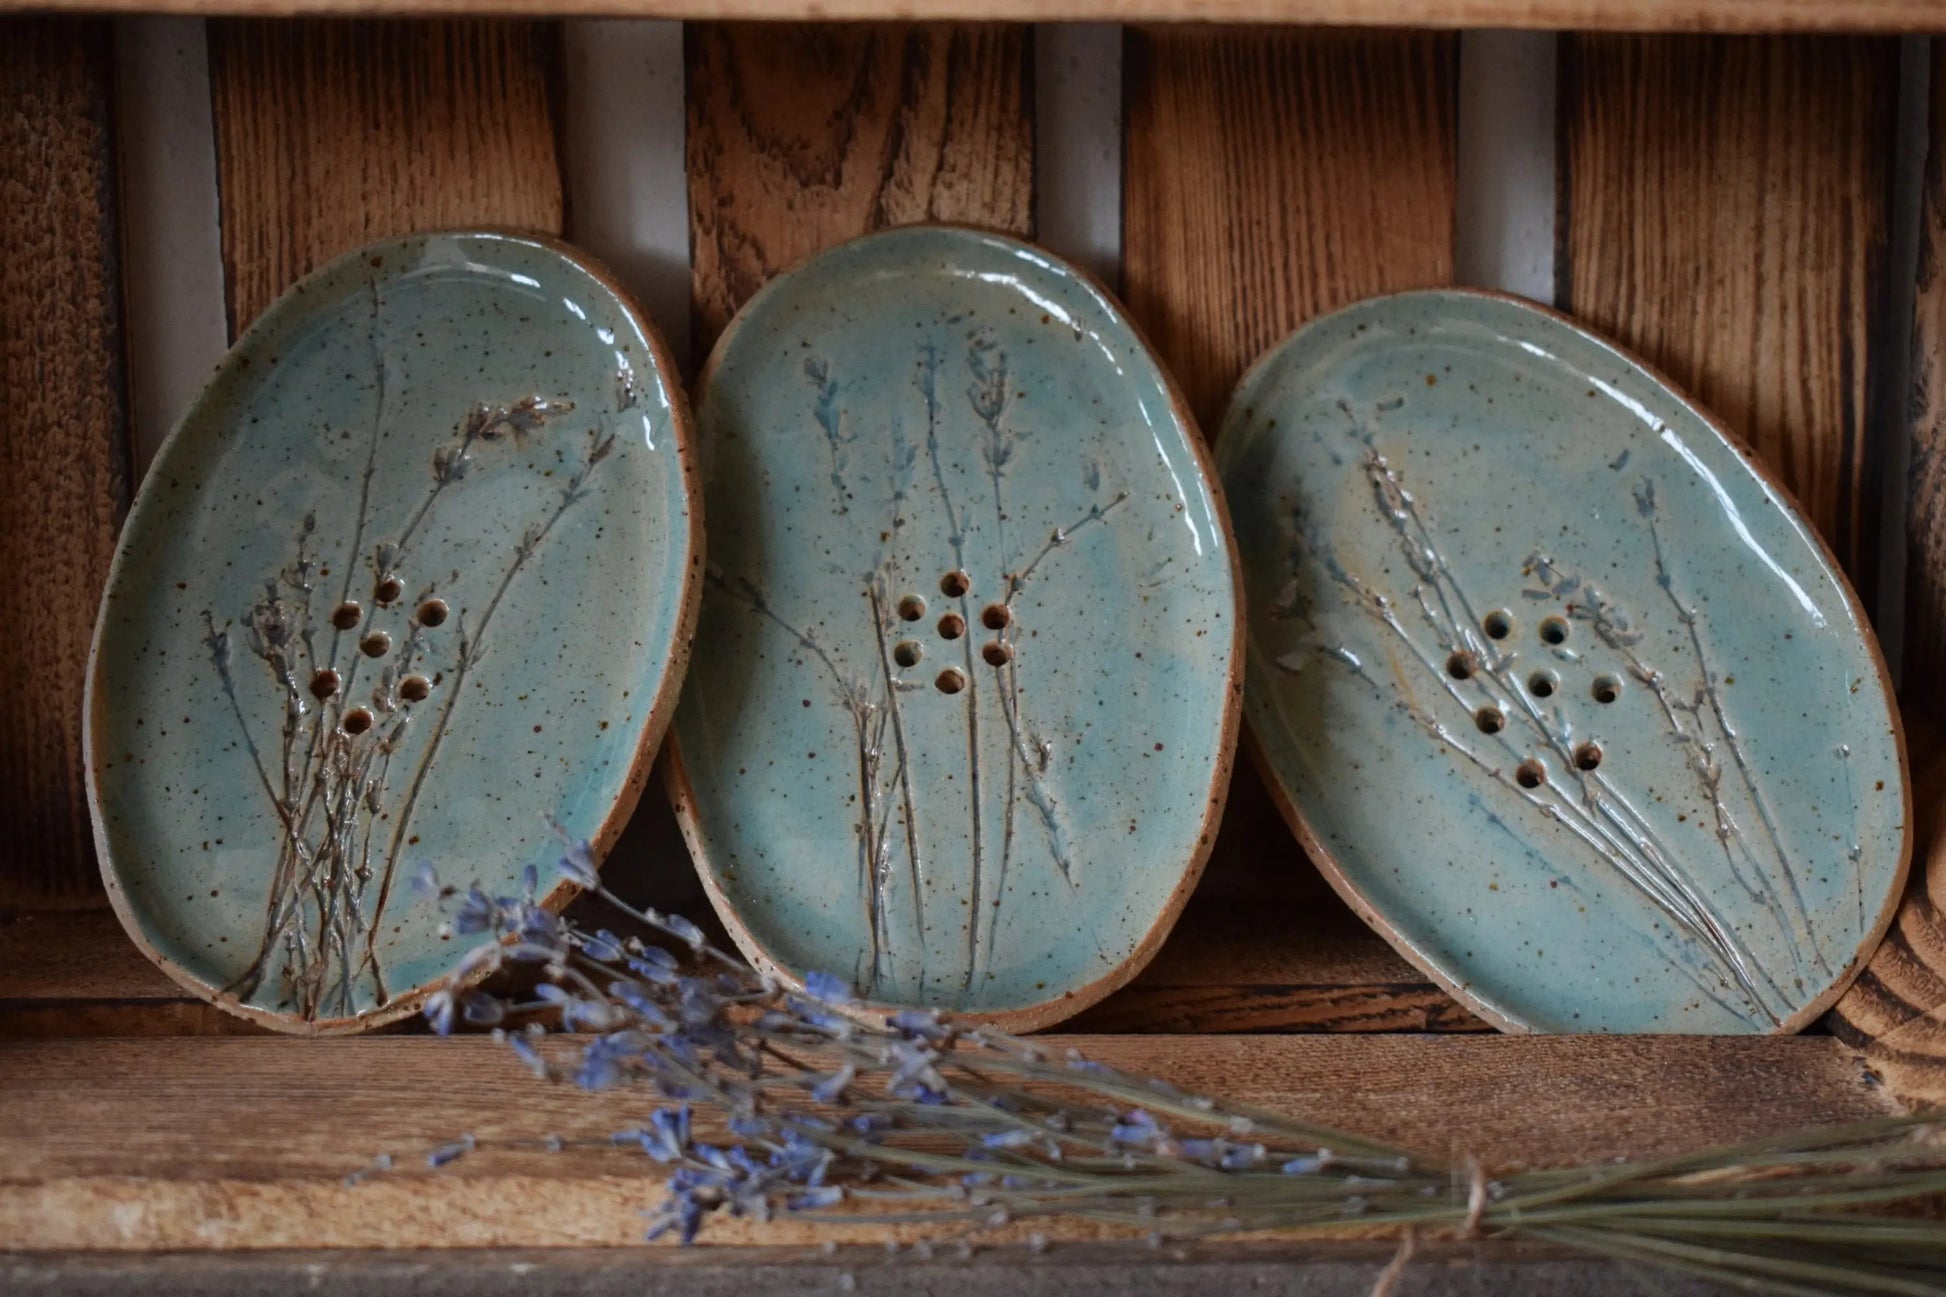 Handmade Ceramic Soap Dish with Hand-Pressed Blossoms